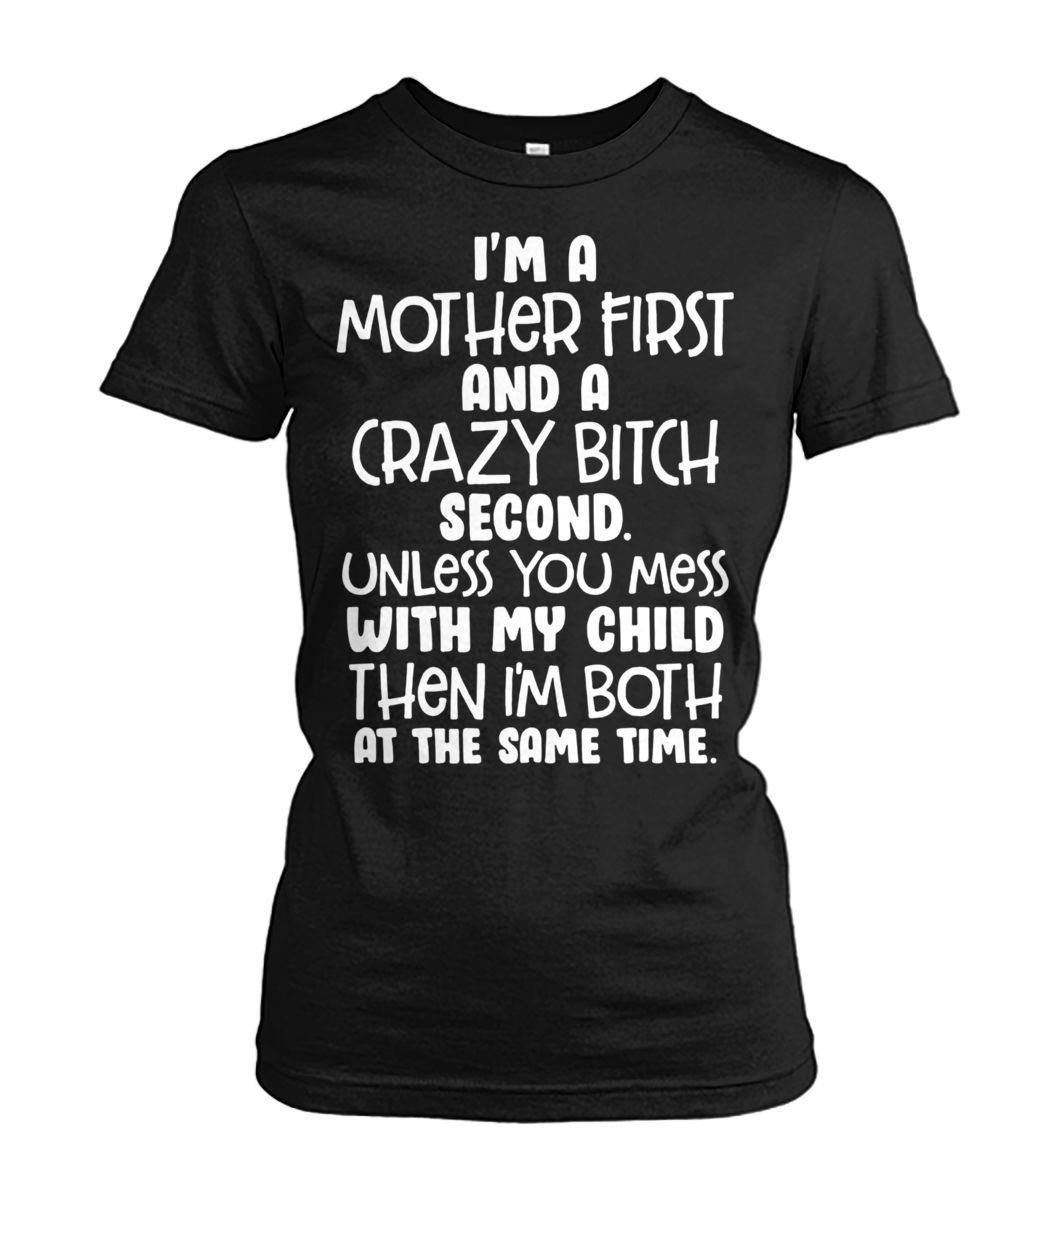 I’m a mother first and a crazy bitch second unless you mess with my child women's crew tee